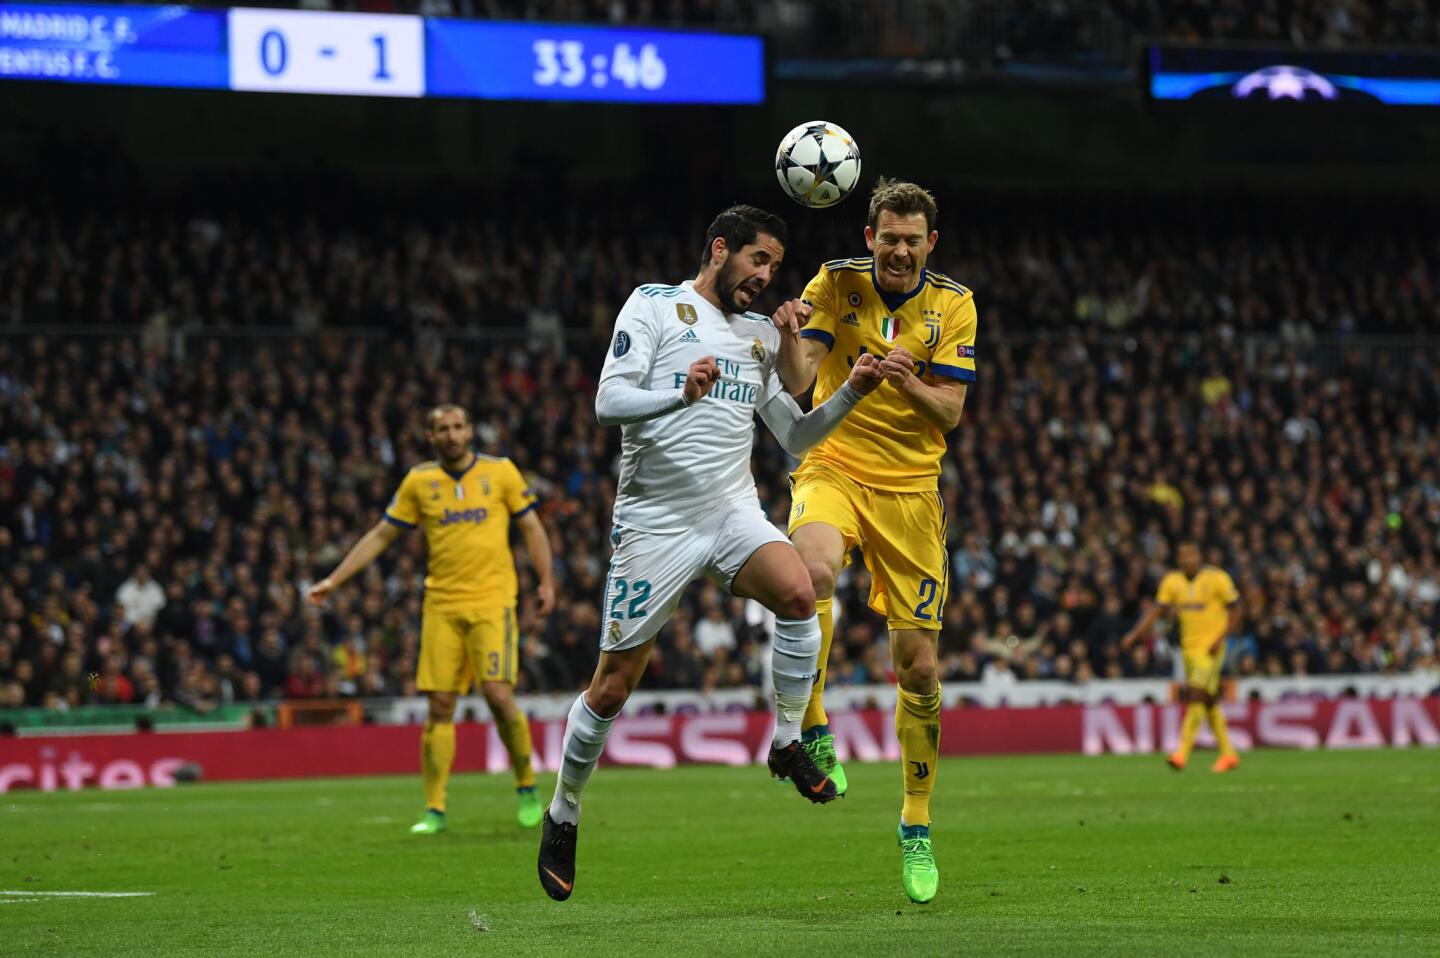 MADRID, SPAIN - APRIL 11: Isco of Real Madrid competes for a header with Stephan Lichtsteiner of Juventus during the UEFA Champions League Quarter Final Second Leg match between Real Madrid and Juventus at Estadio Santiago Bernabeu on April 11, 2018 in Madrid, Spain. (Photo by David Ramos/Getty Images) ** OUTS - ELSENT, FPG, CM - OUTS * NM, PH, VA if sourced by CT, LA or MoD **